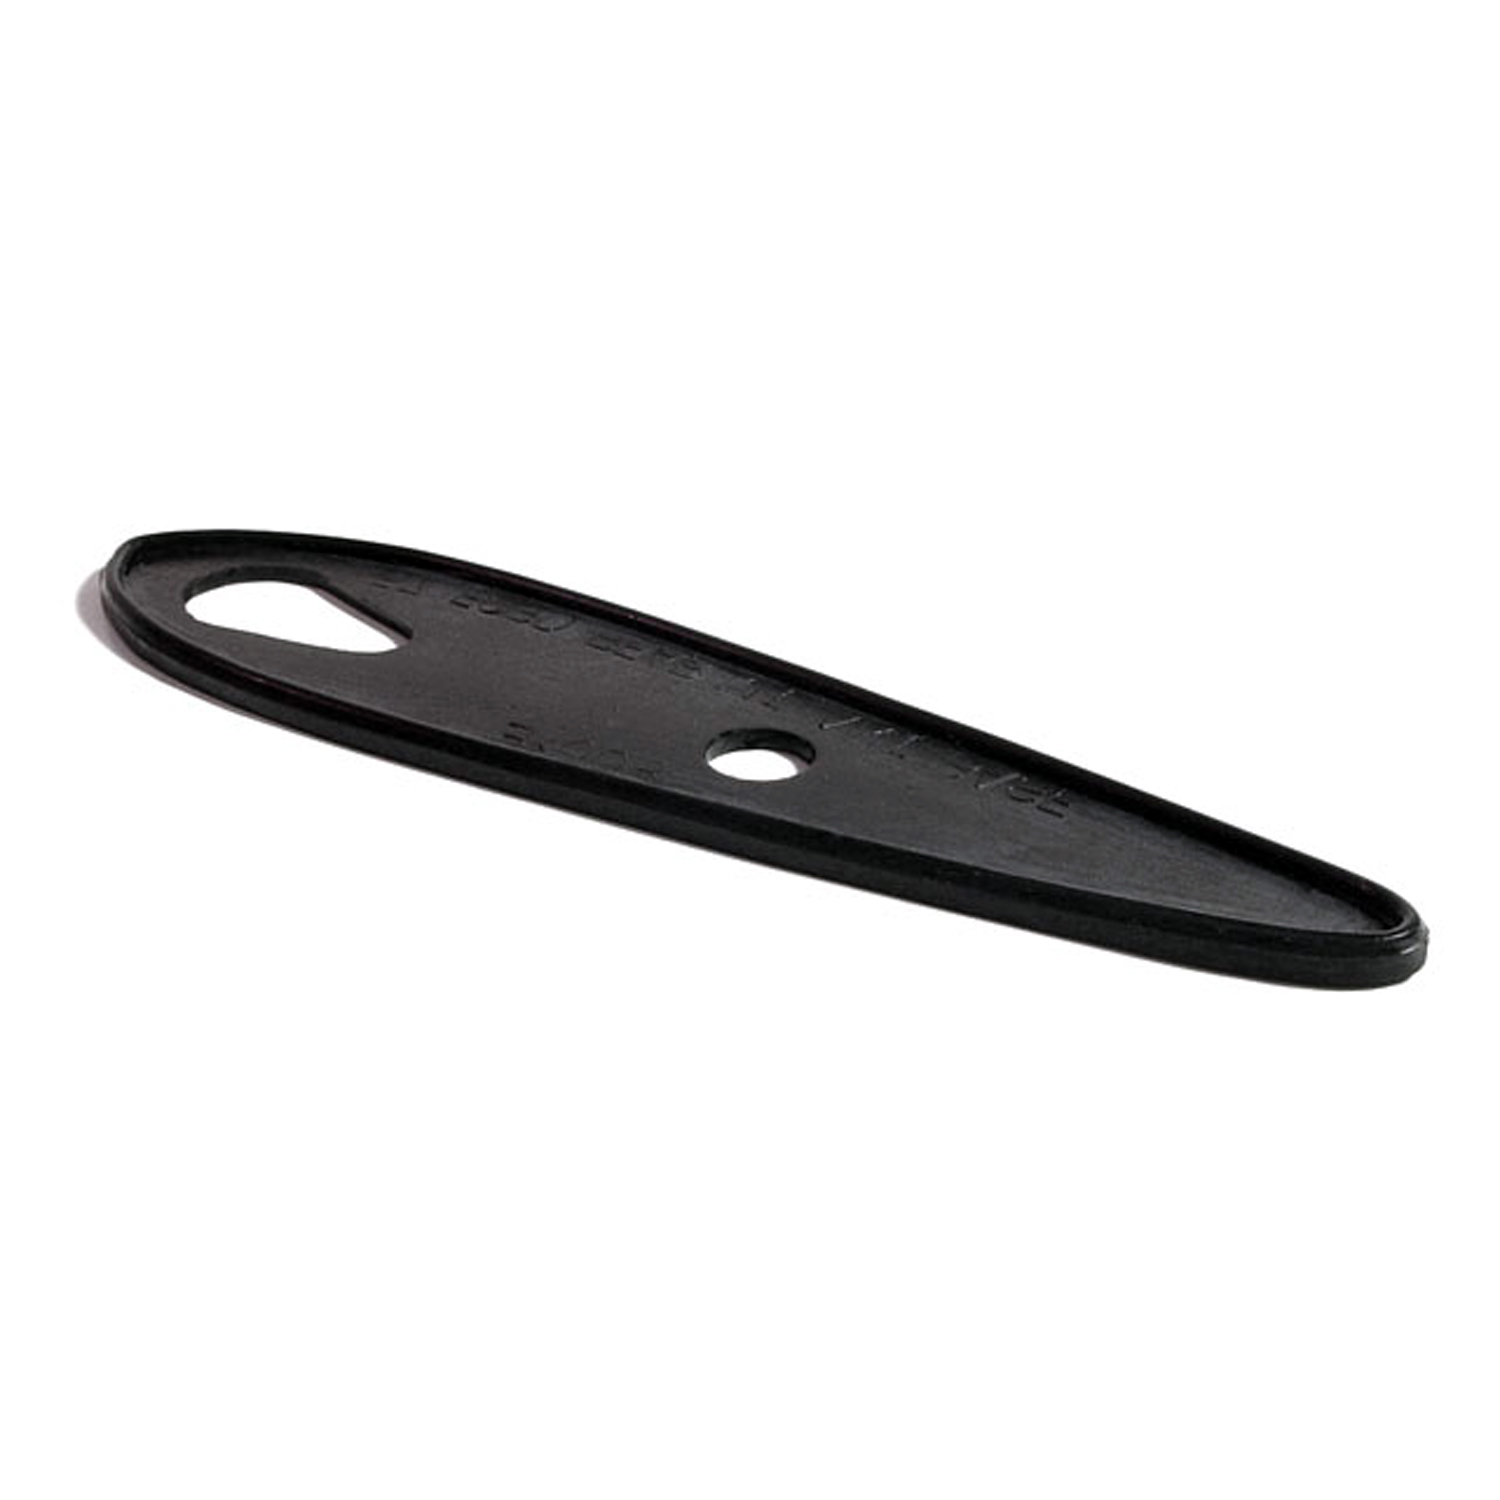 1957 Ford Courier Sedan Delivery Rear Mount Antenna Base Pad.  1-5/8 wide X 6-3/8 long-MP 800-E